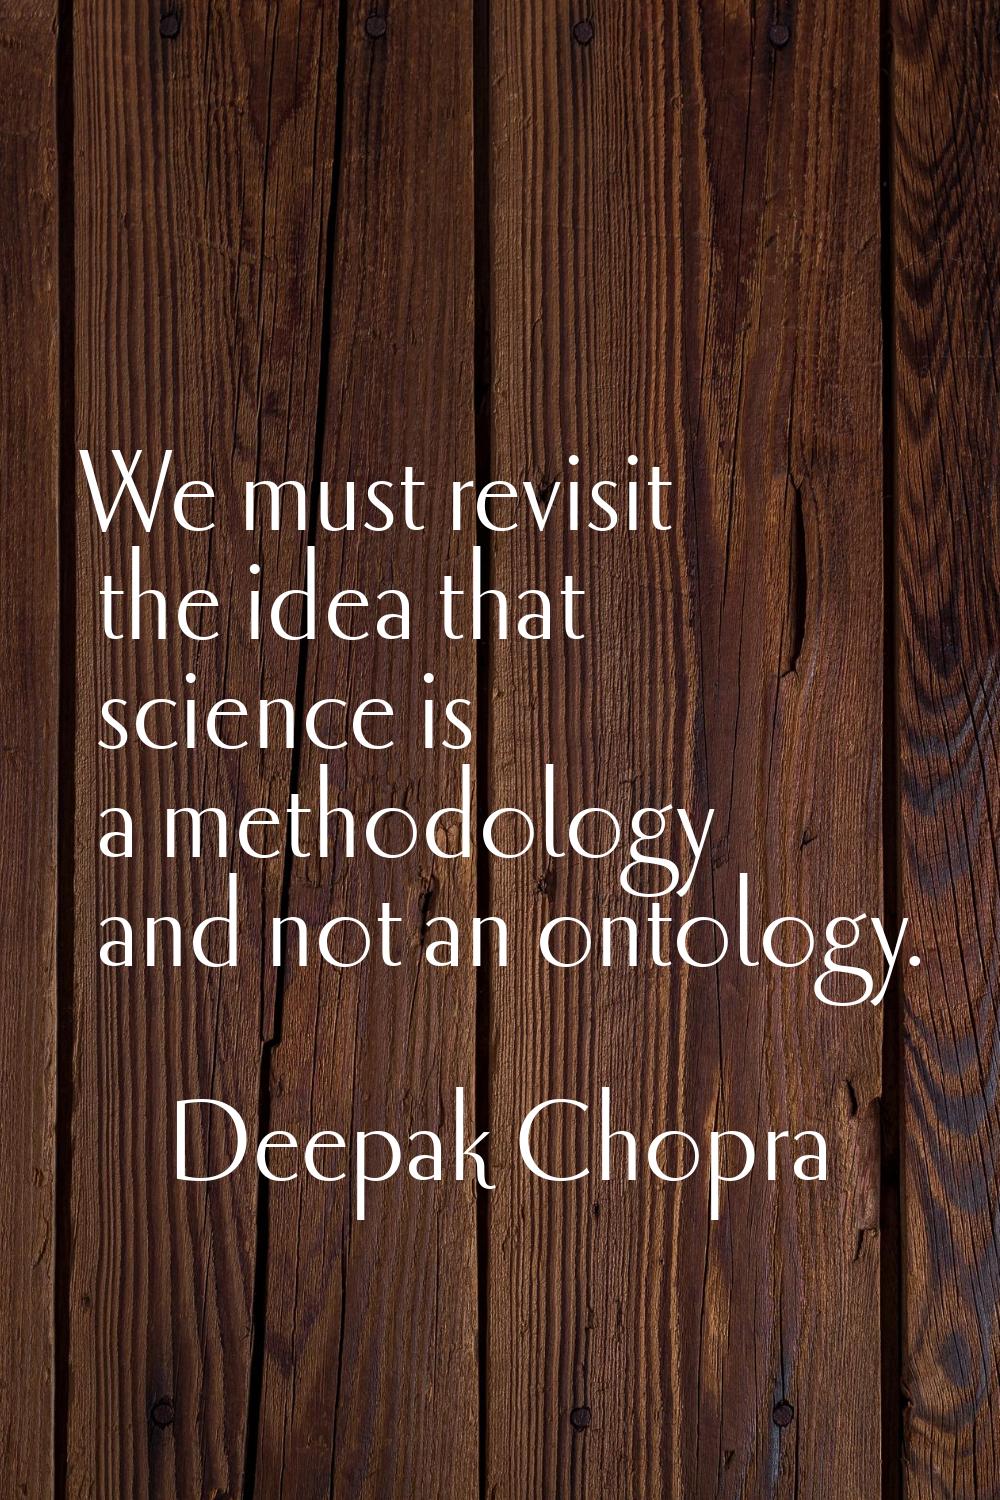 We must revisit the idea that science is a methodology and not an ontology.